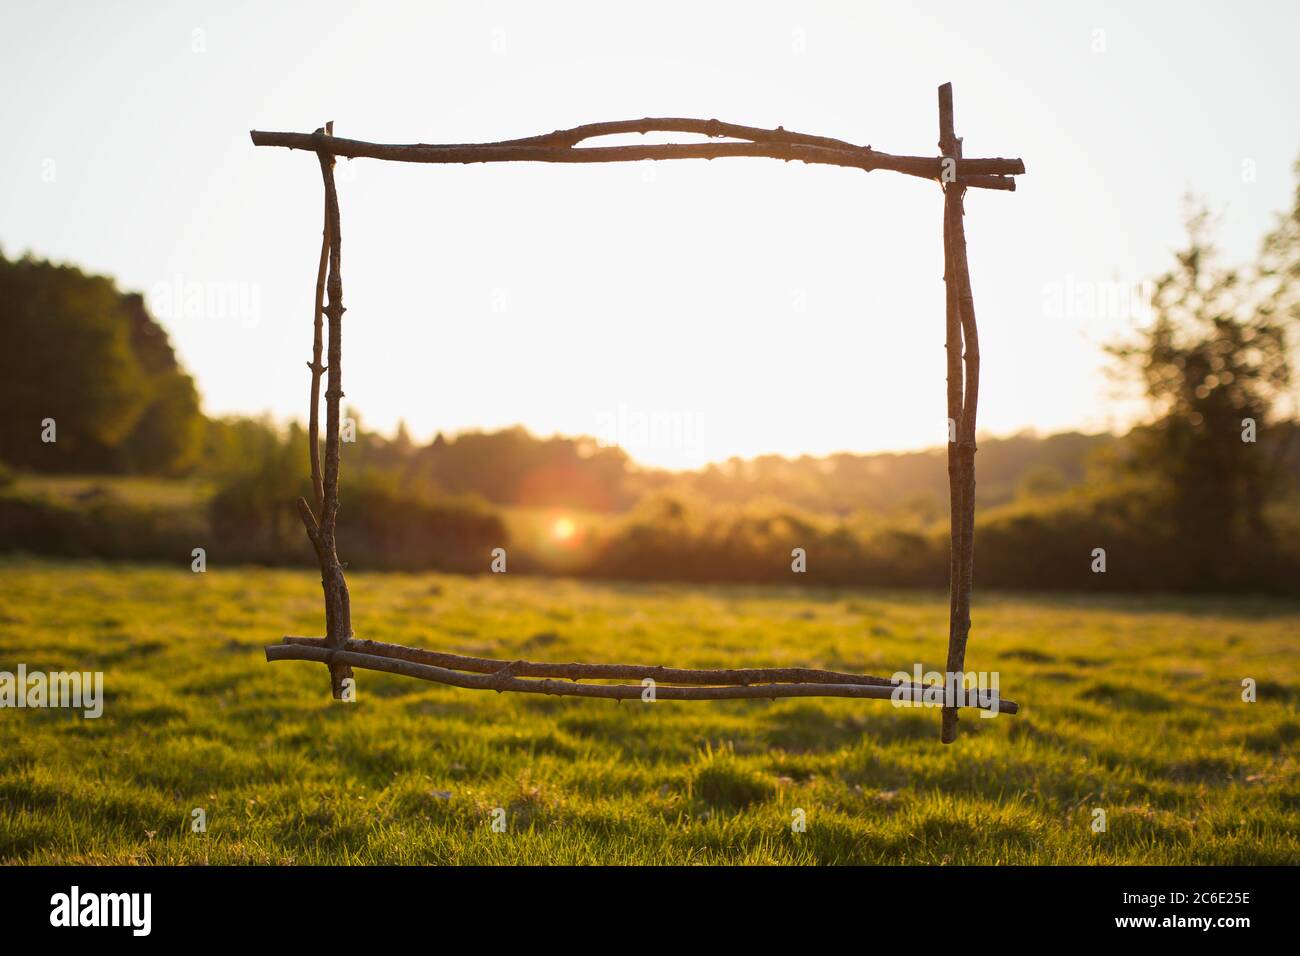 Wood stick frame overlooking sunny tranquil rural view Stock Photo